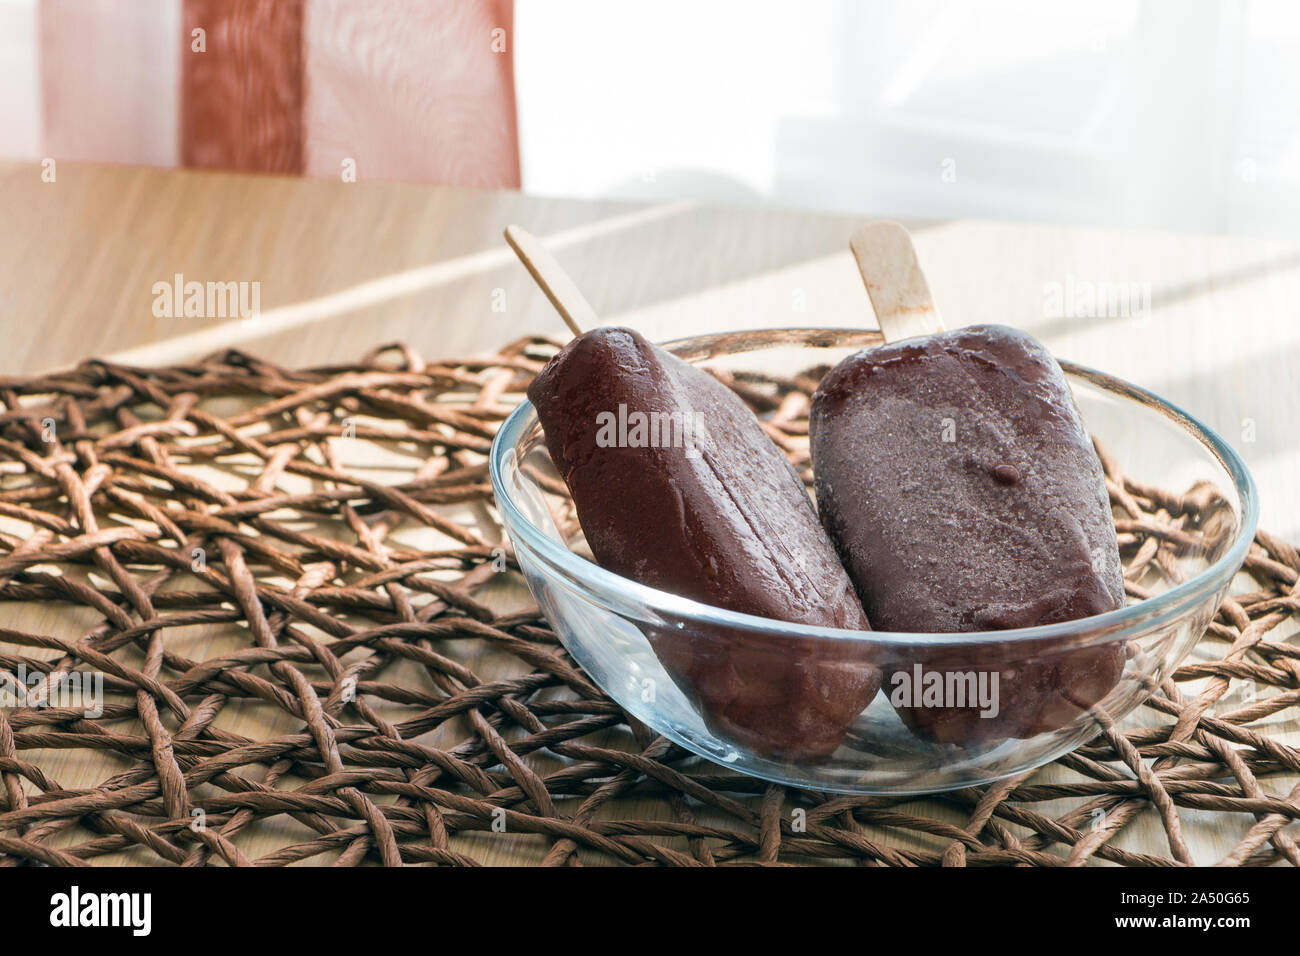 Delicious and healthy sweets. Fresh vegan raw food ice cream, just taken out of the freezer with hoarfrost on a chocolate surface. Glass bowl on the Stock Photo